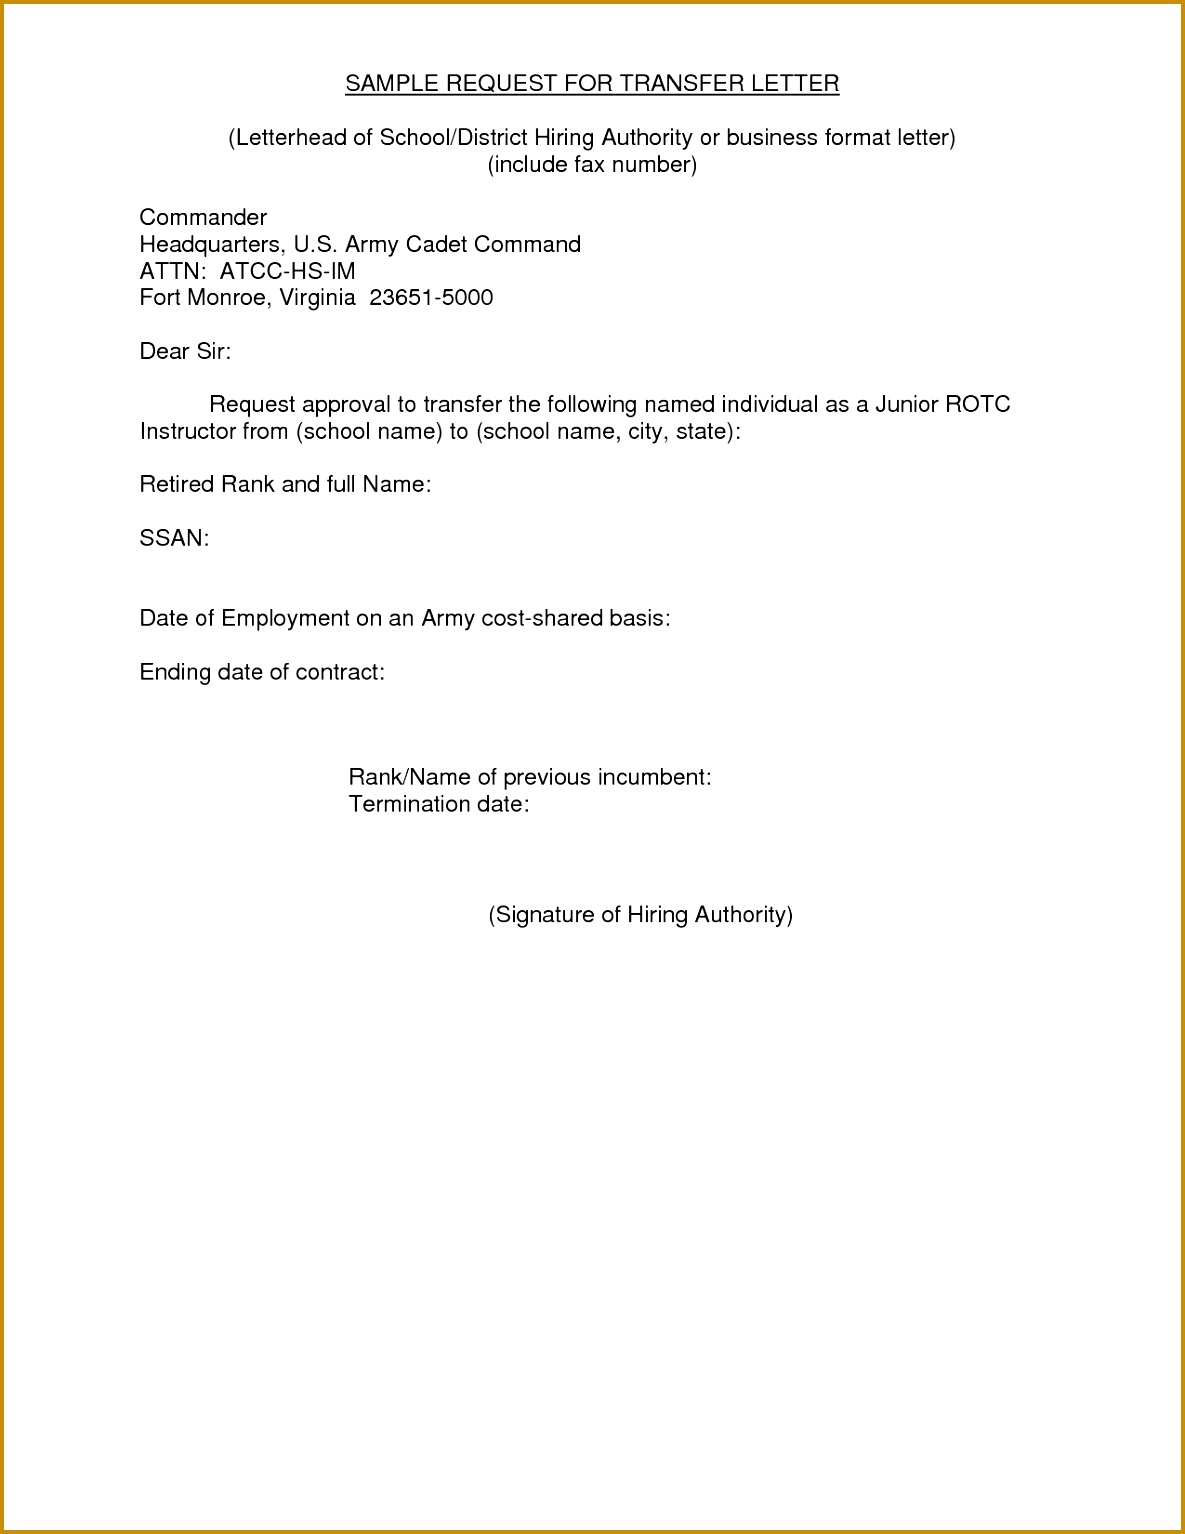 TRANSFER REQUEST LETTER Example of a letter or email message used to request a transfer to a different job within the pany where you work 15341185